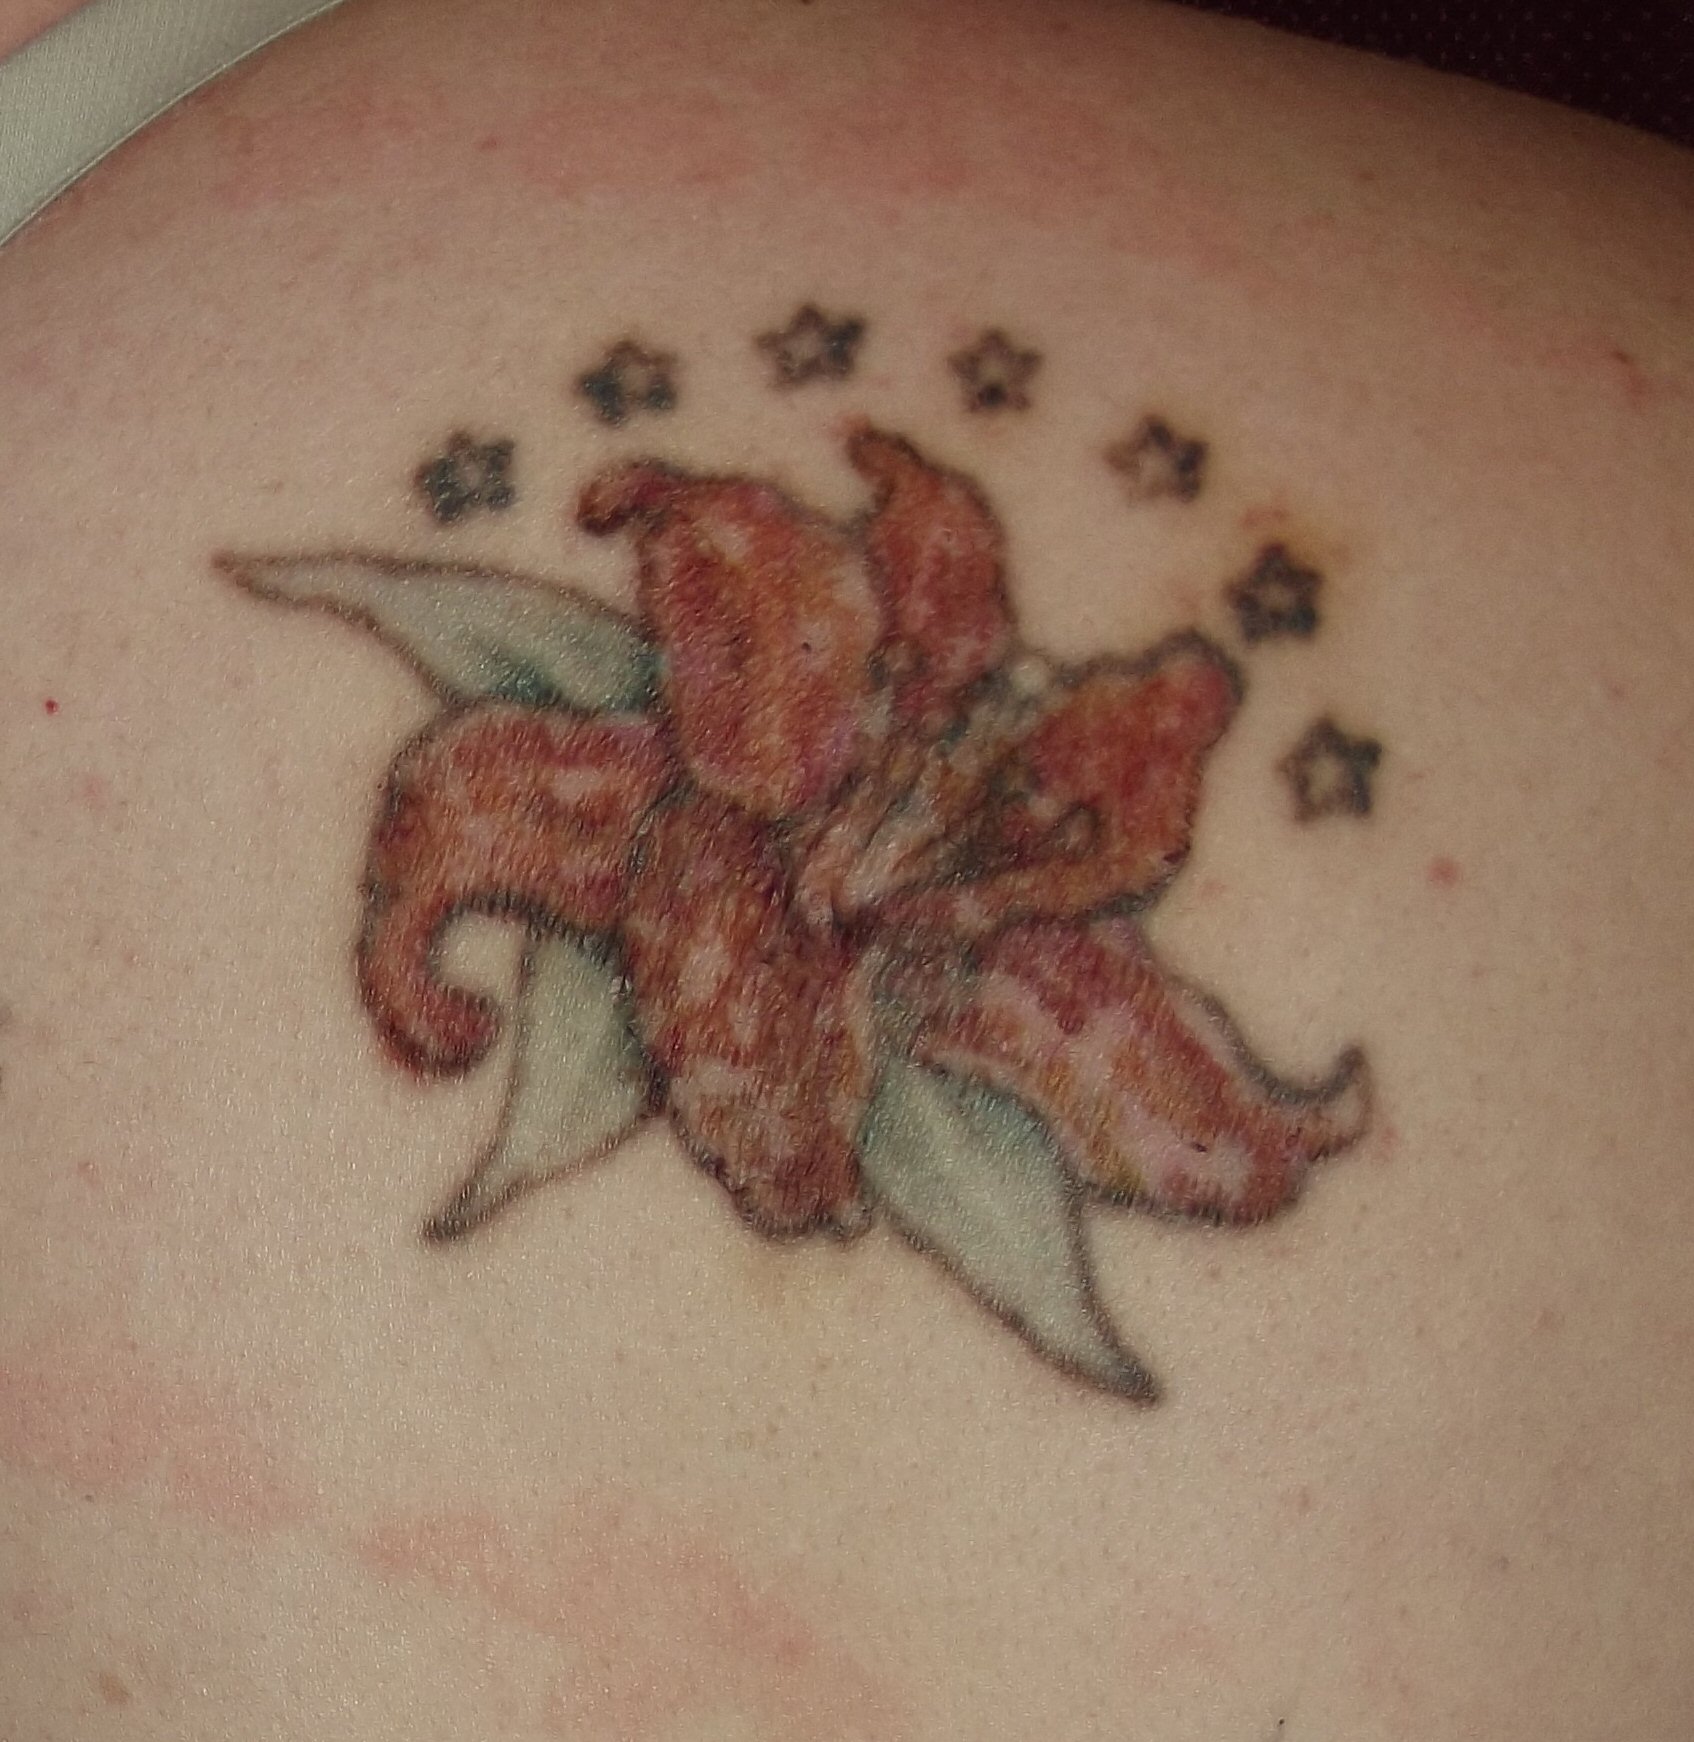 My Experience With R20 Laser Tattoo Removal